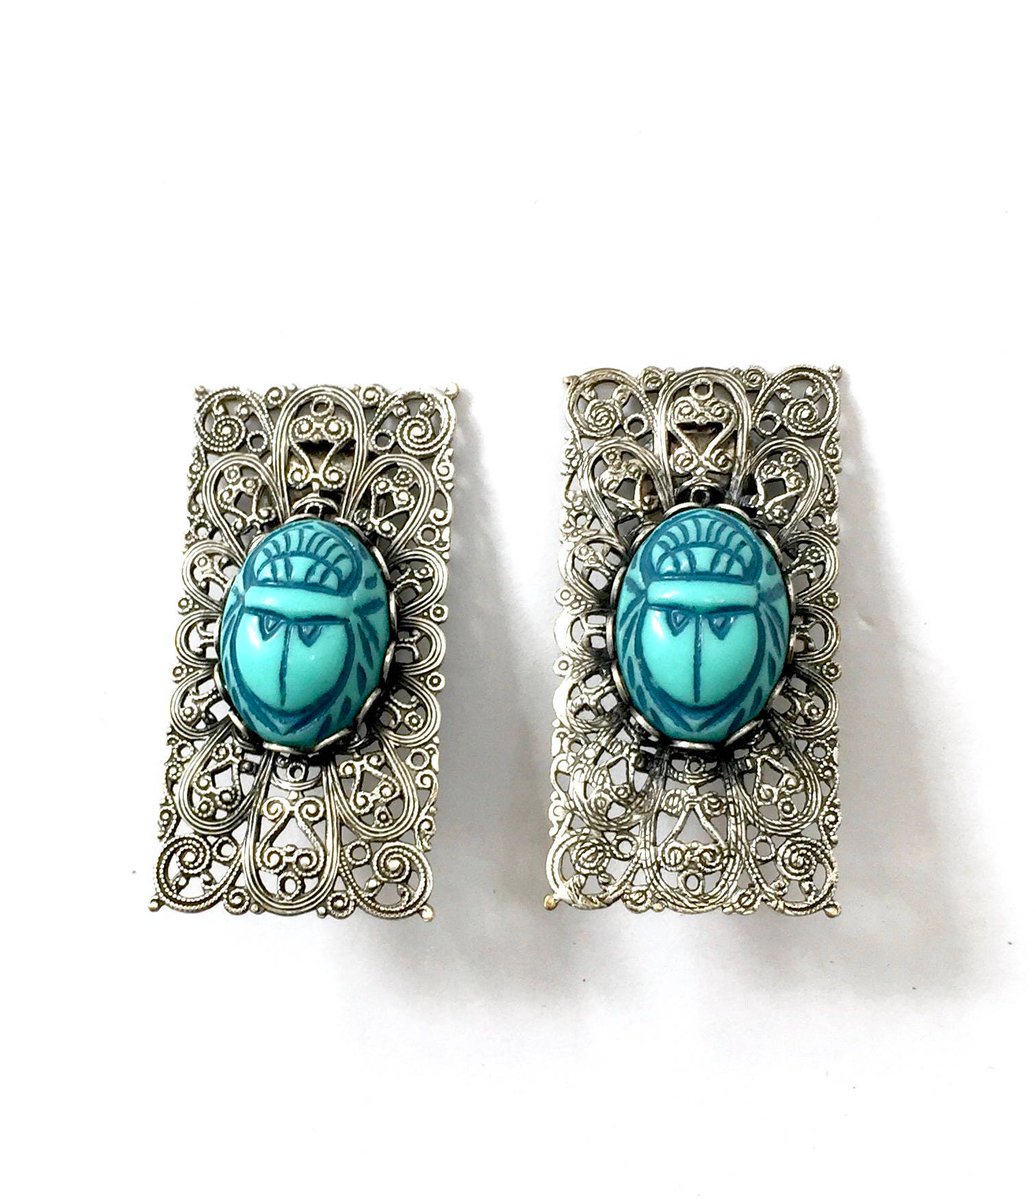 Egyptian Revival Scarab Earrings Ornate Filigree Silver Tone Metal Mount Resin Turquoise Scarab Stone Long Rectangle Clip-on Gift for Her #EgyptianRevival #ScarabEarrings 
$59.00
➤ etsy.com/listing/609370…